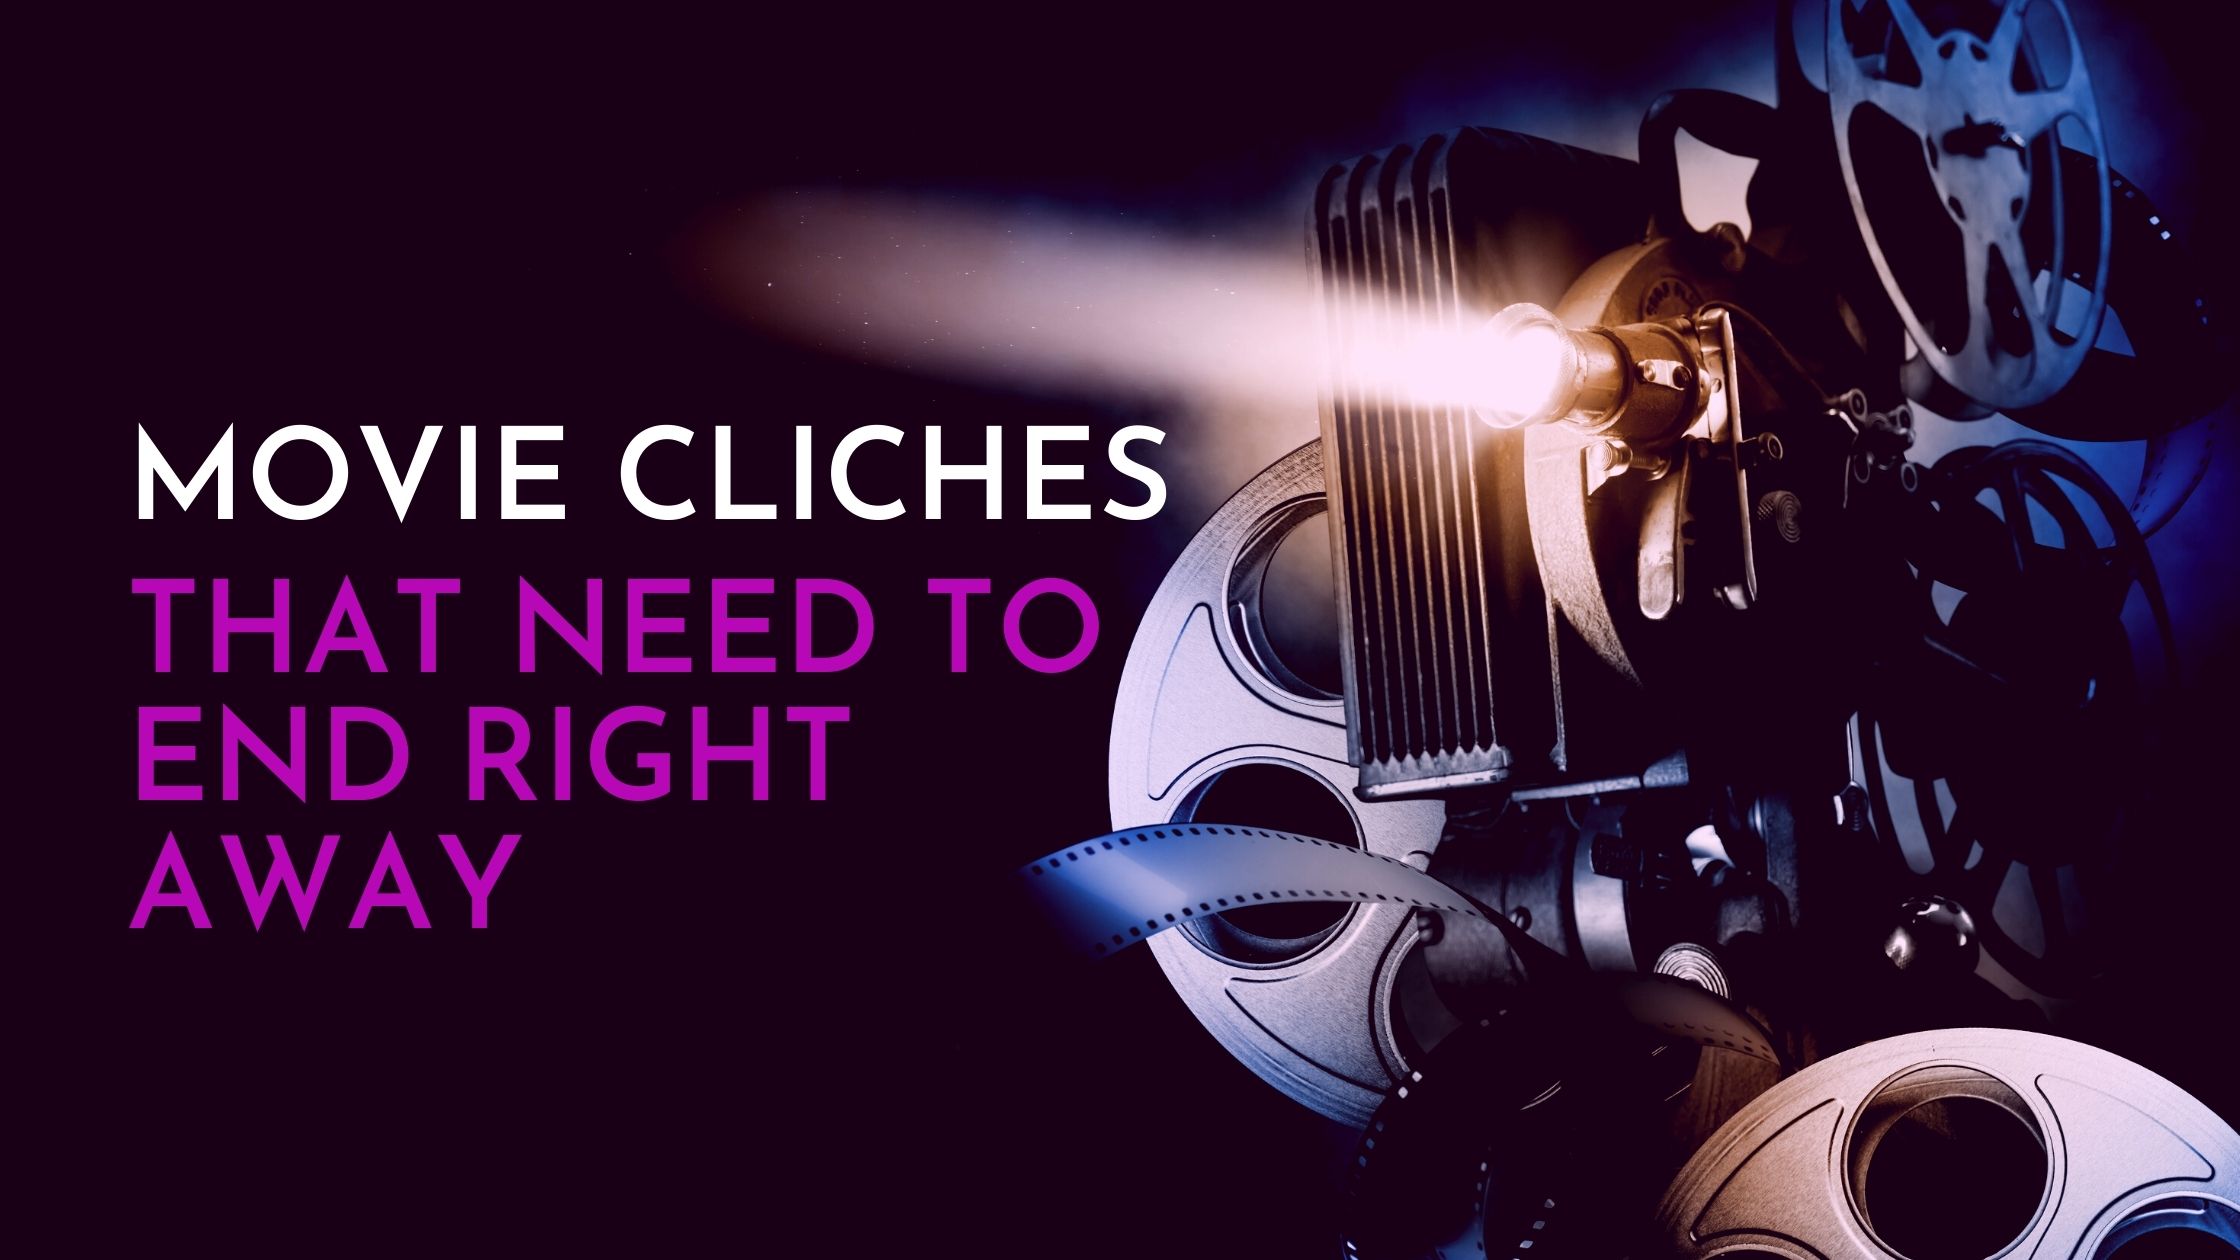 Movie cliches that need to end right away